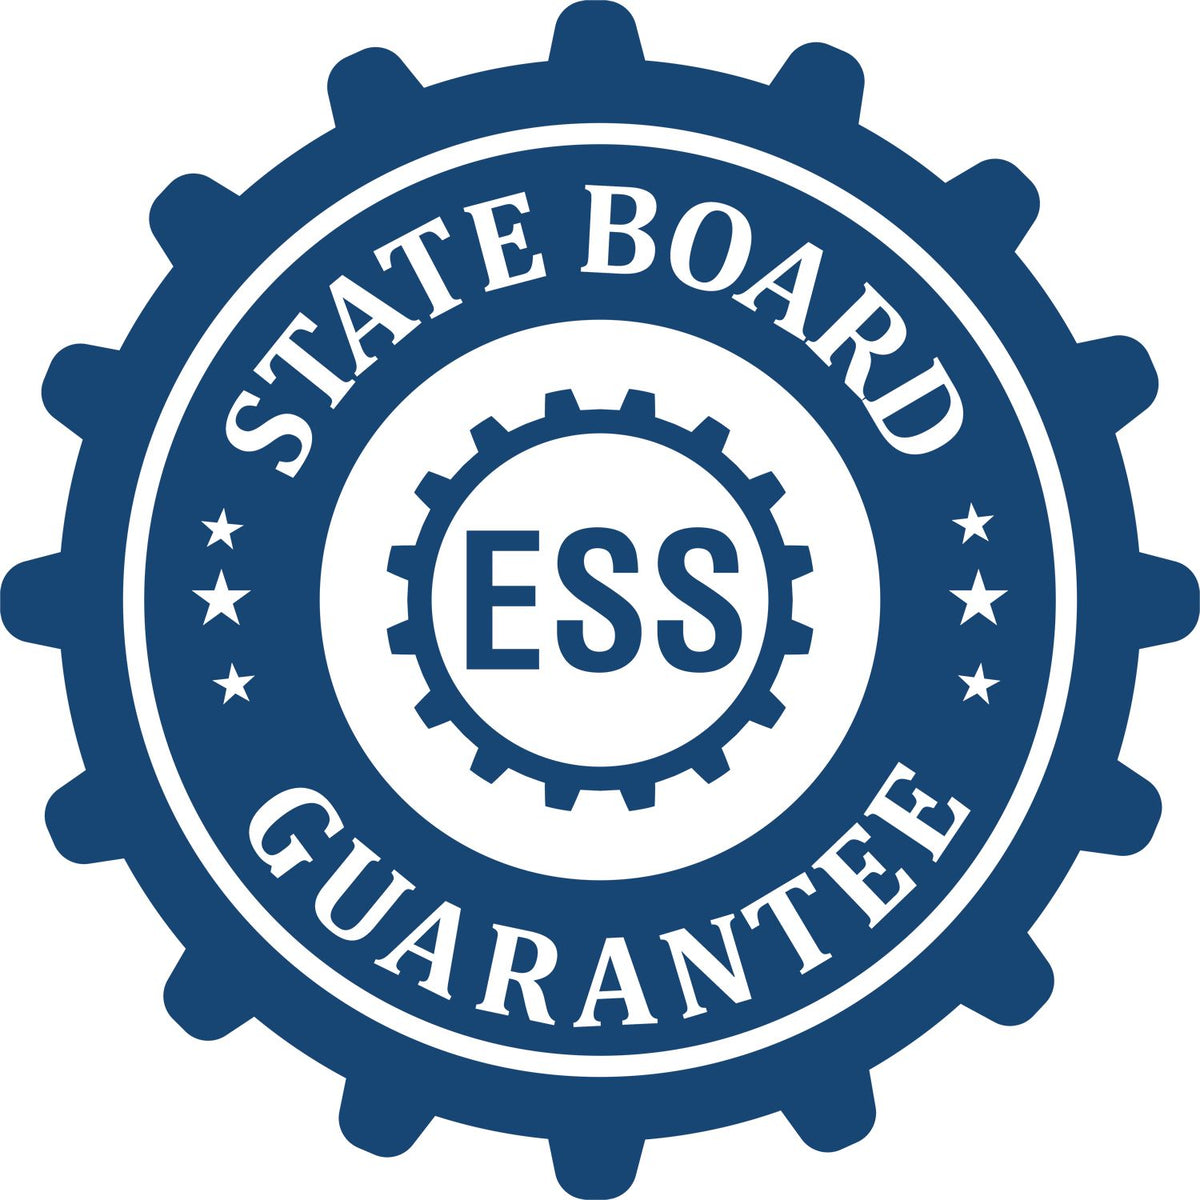 An emblem in a gear shape illustrating a state board guarantee for the Heavy-Duty Montana Rectangular Notary Stamp product.